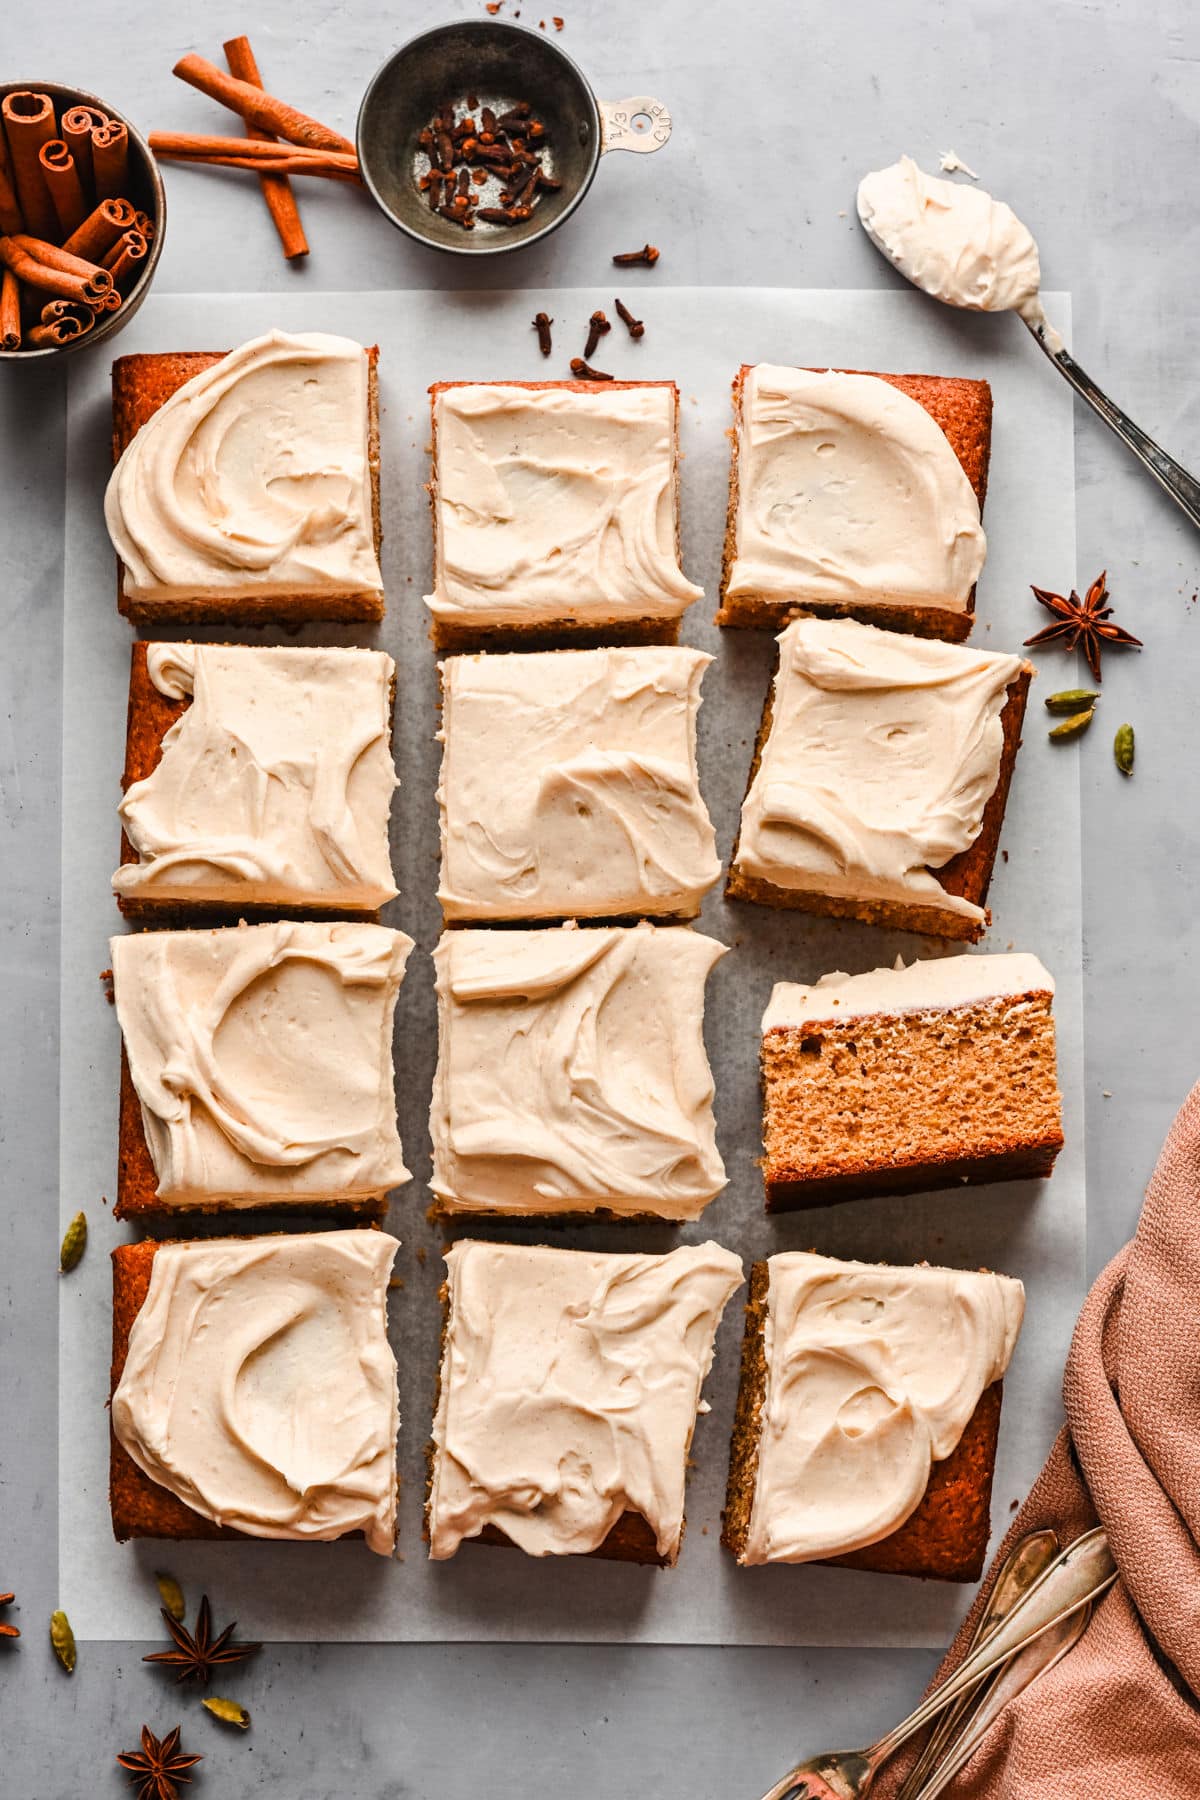 A pumpkin spice cake frosted with cream cheese frosting and surrounded by cinnamon sticks and spices.